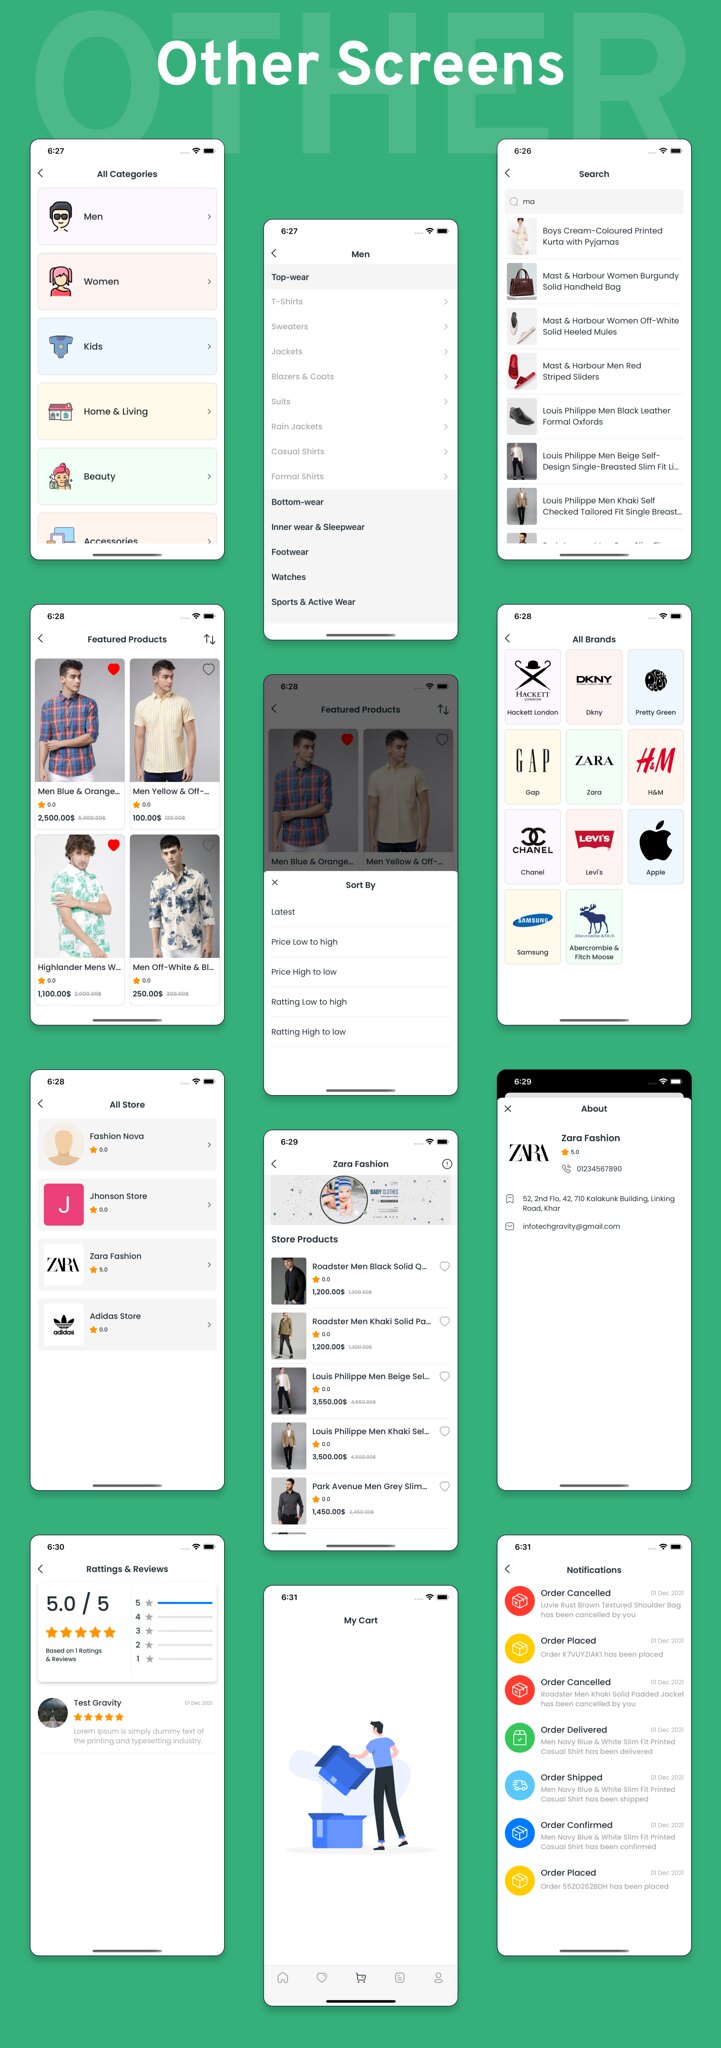 eCommerce - Multi vendor ecommerce Android App with Admin panel - 14